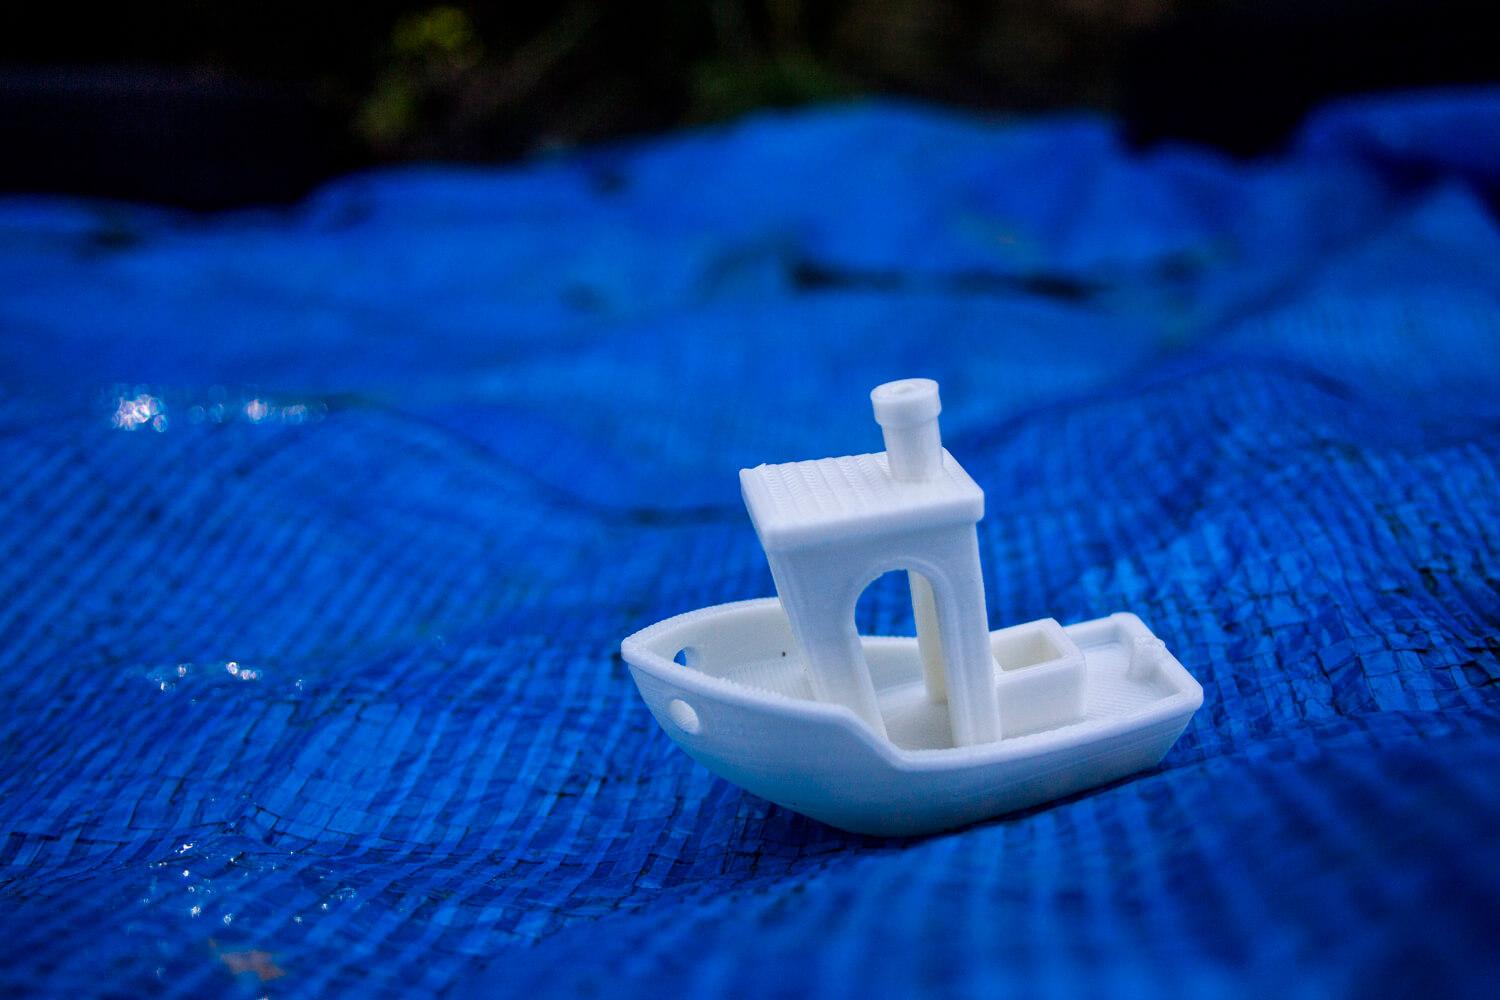 A small plastic boat that is 'sailing' on a blue tarpaulin